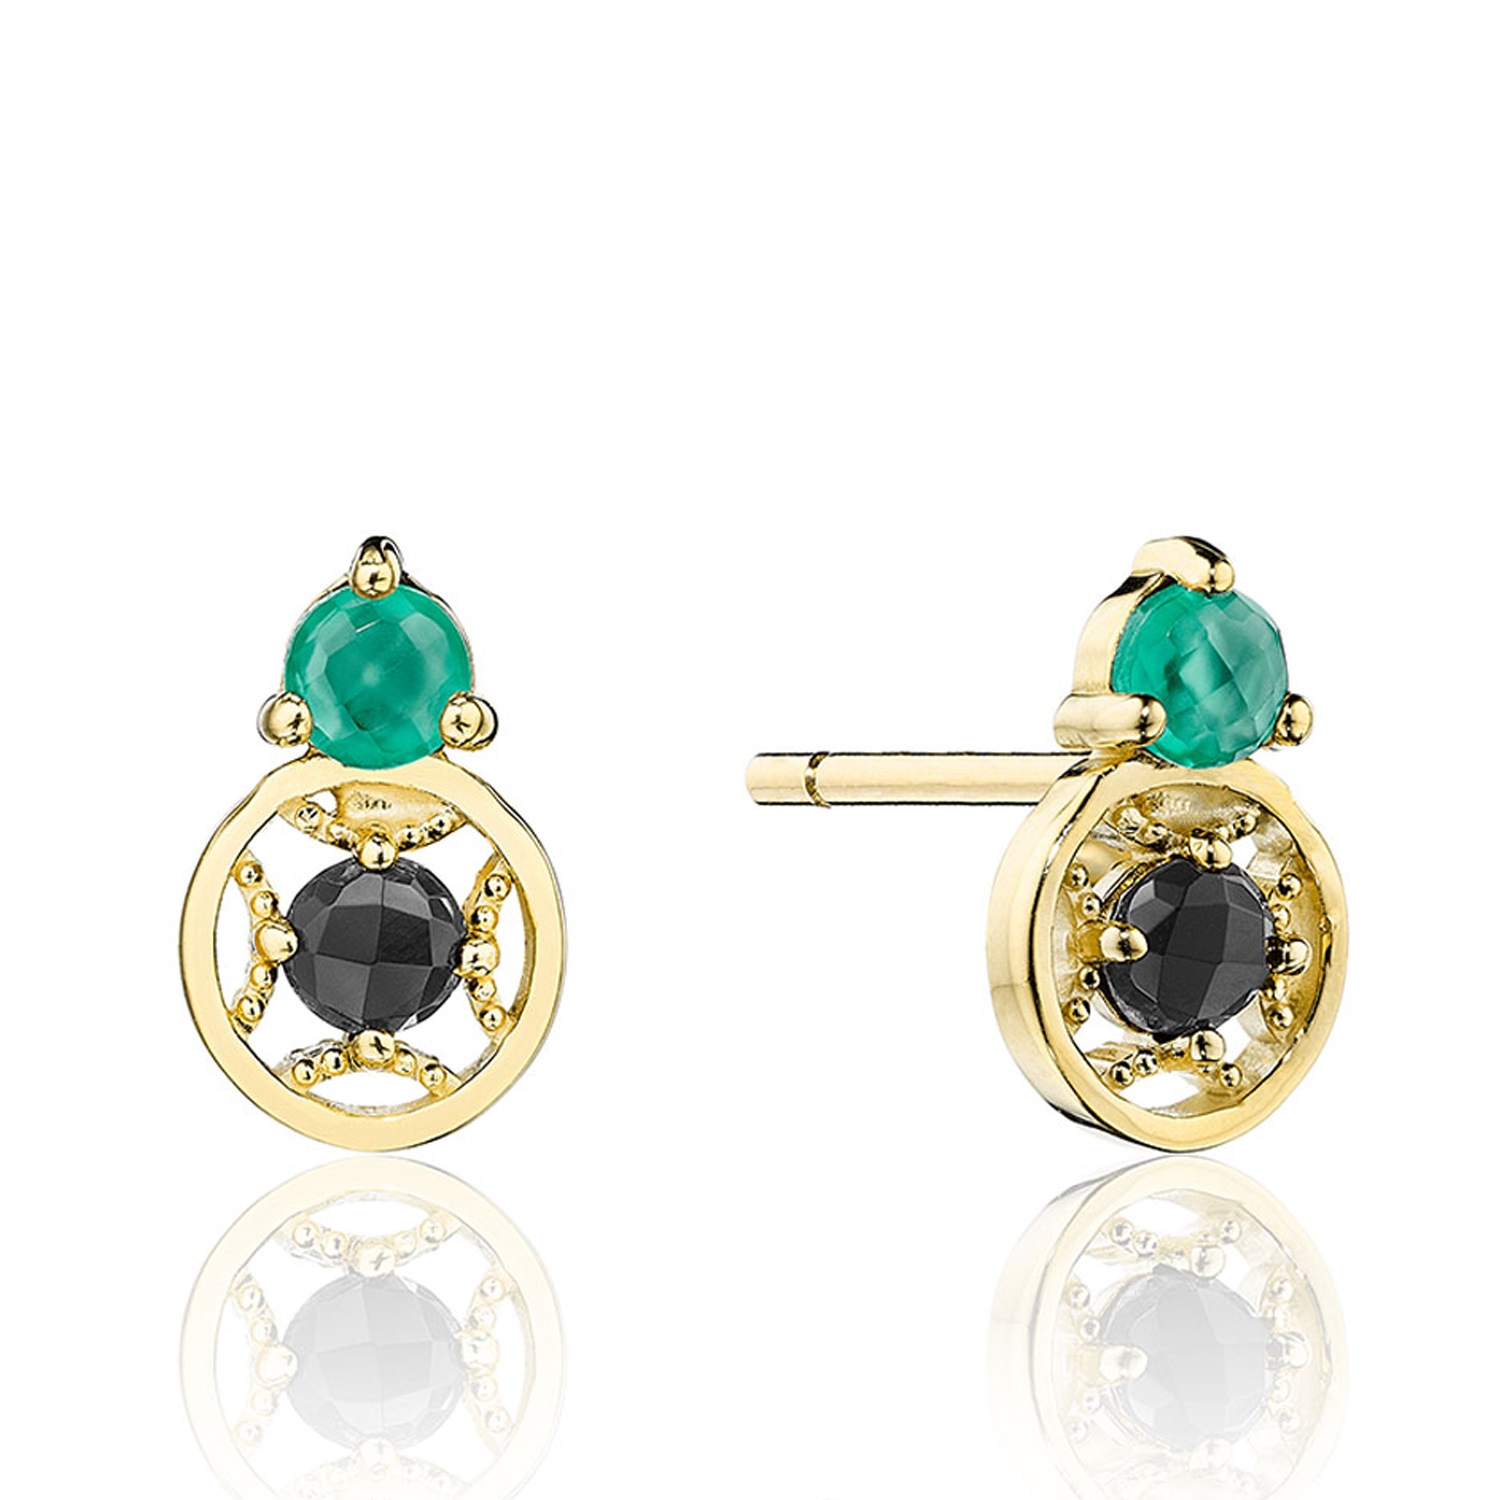 Tacori SE2541949FY Petite Gemstone Earrings with Black and Green Onyx